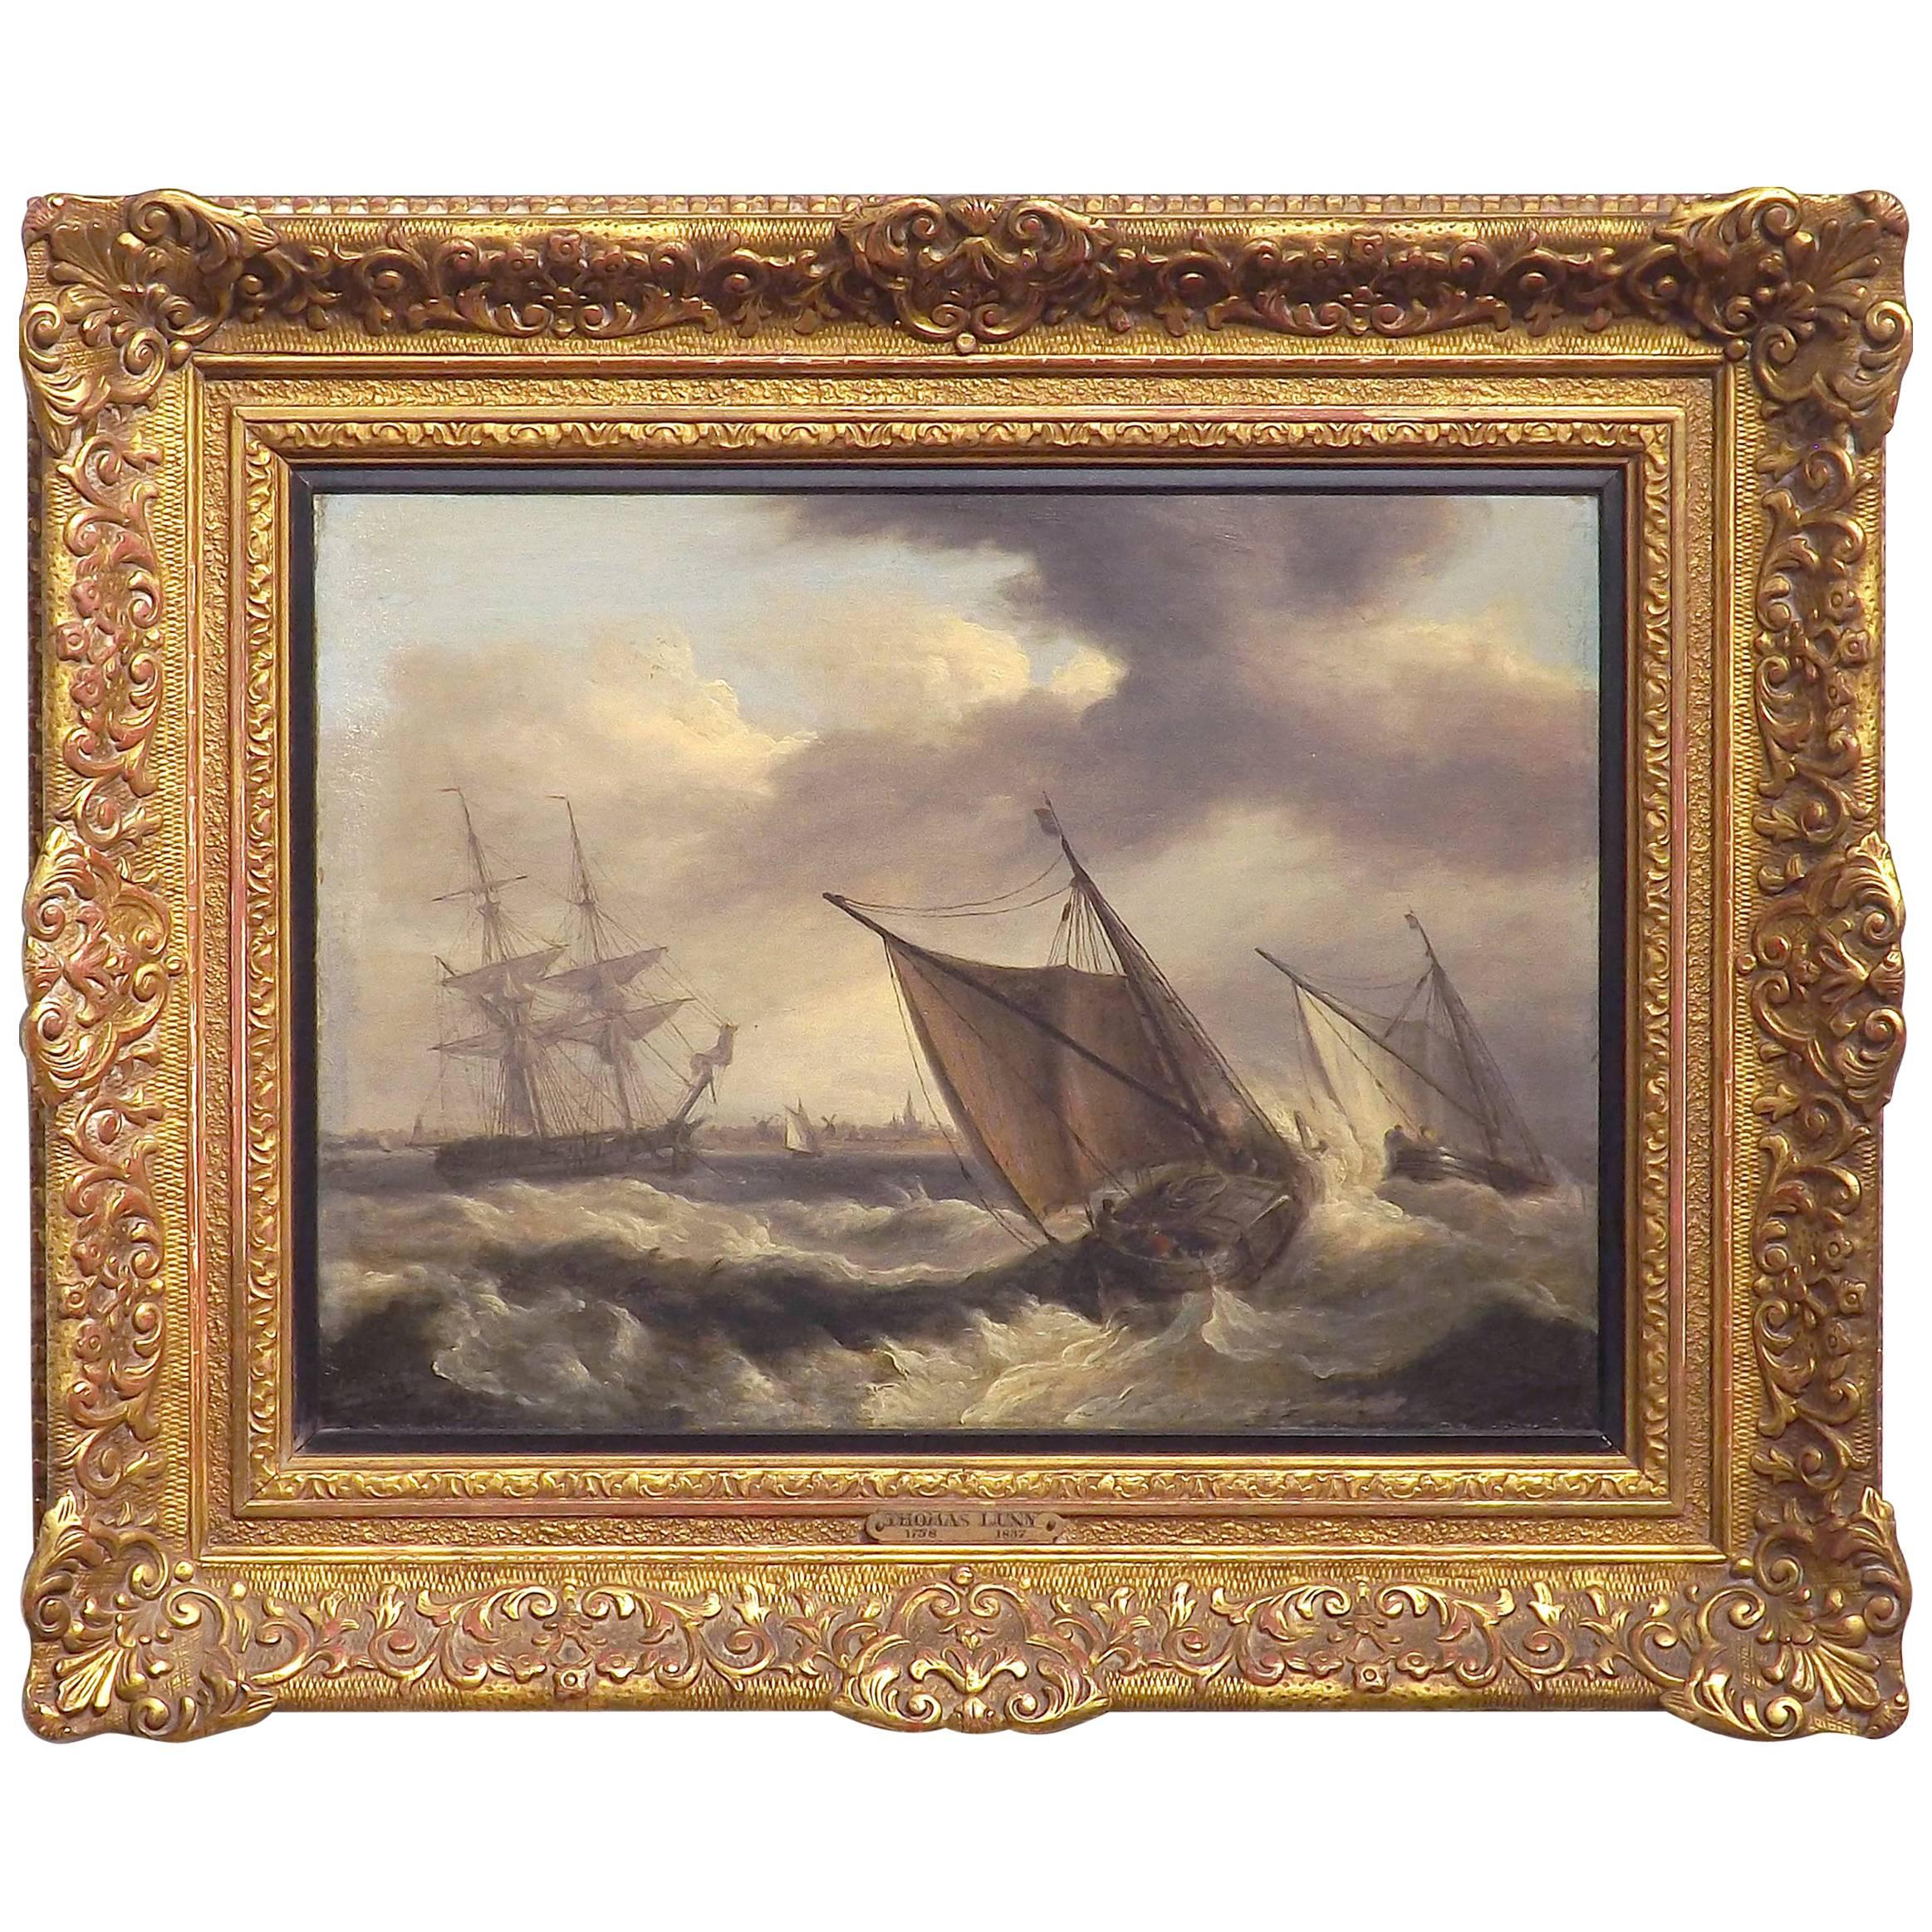 Original Oil Painting of Fishing Boats on Rough Seas by Thomas Luny Dated 1832